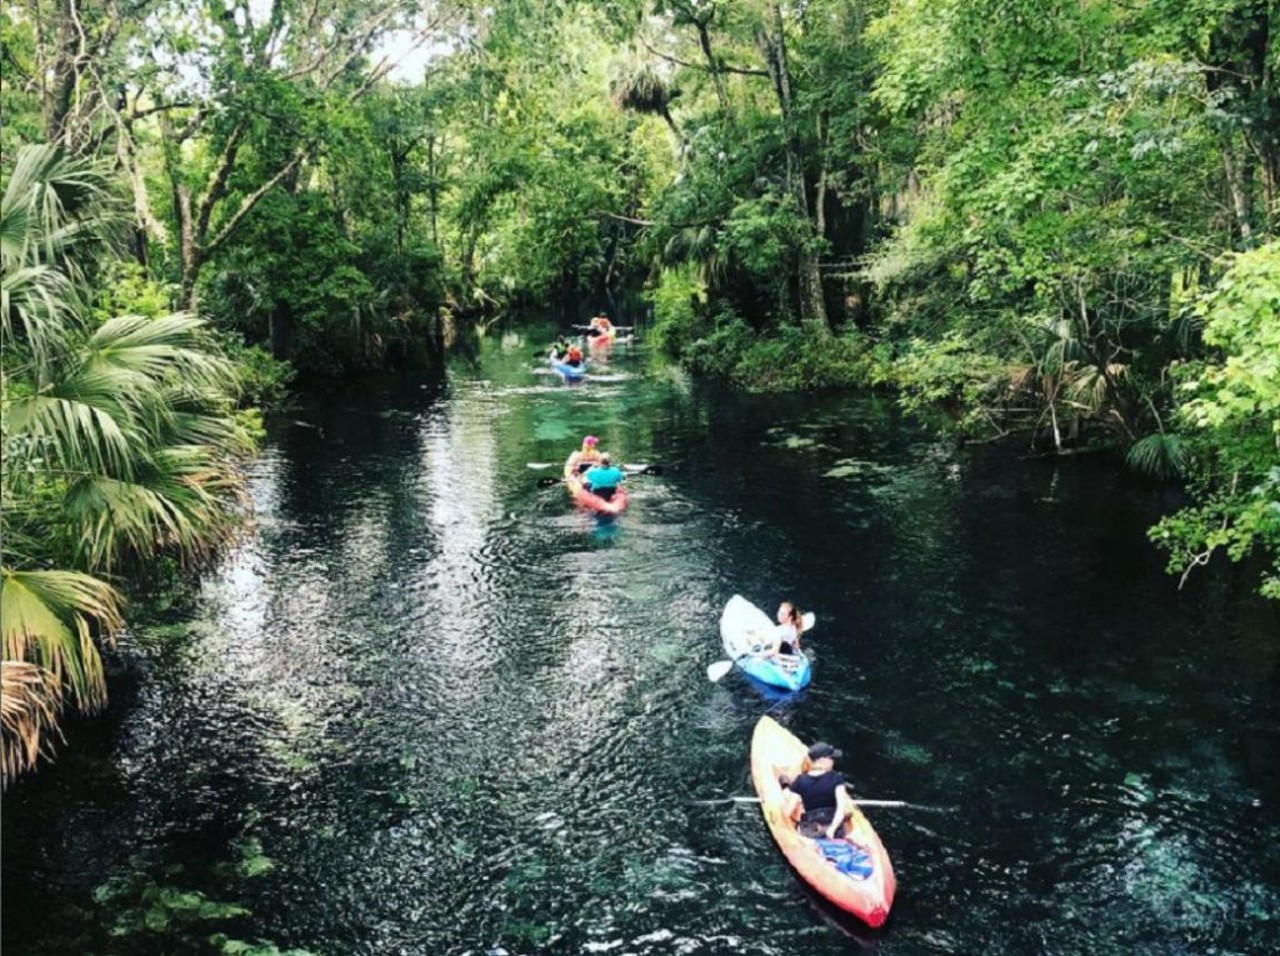 Silver Springs State Park 
1425 N.E. 58 Avenue, Ocala 
Whether your paddleboarding, kayaking, taking a swim, or enjoying a glass-bottomed boat tour, Silver Springs has plenty of breathtaking sights to take in and enjoy.
Photo via Silver Springs State Park/Instagram